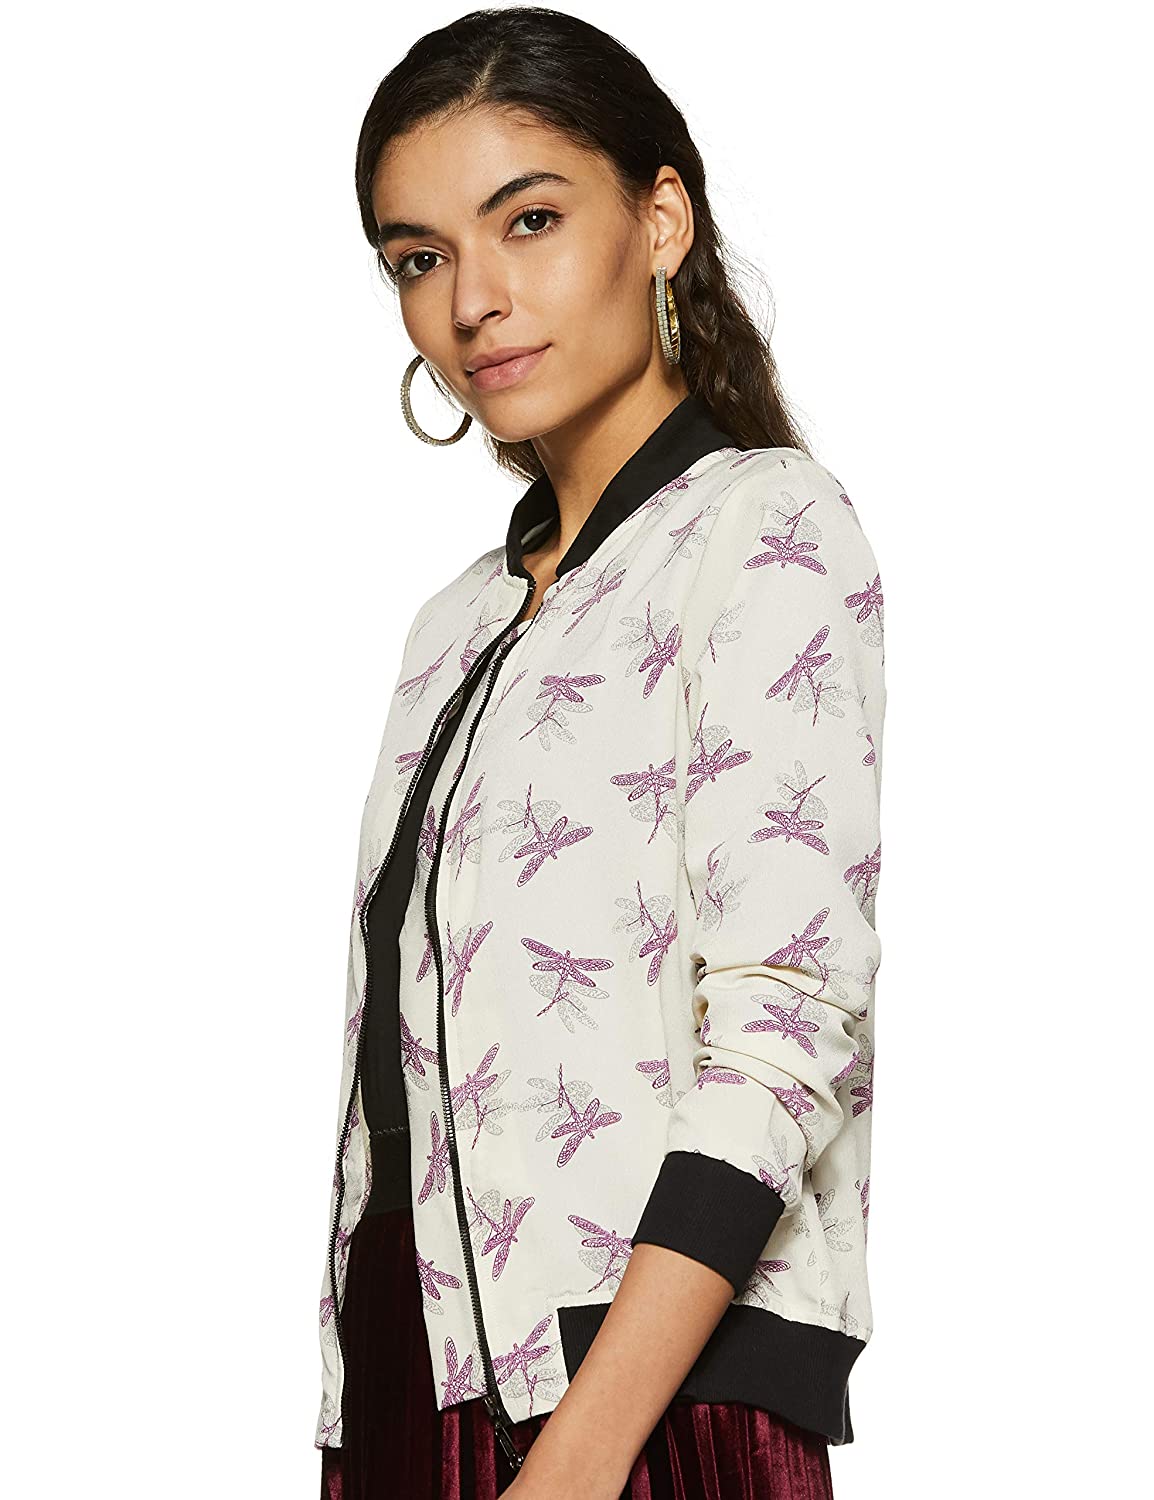 Miss Chase Women's Multicolored Printed Bomber Jacket